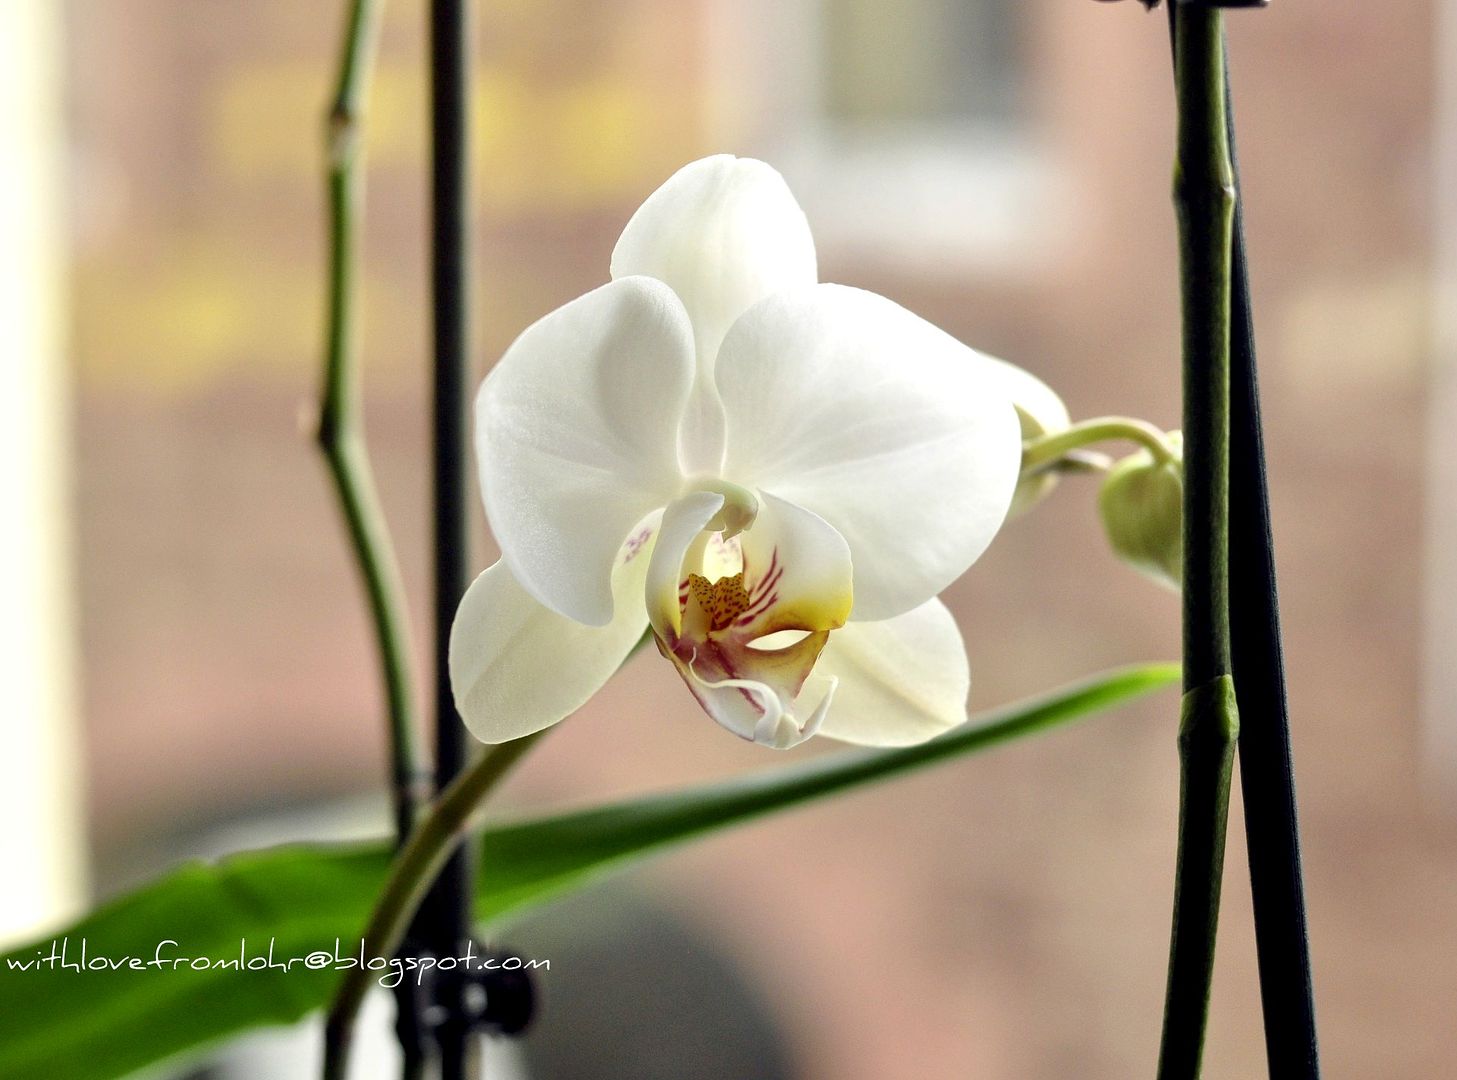 13.02.12, The last of my orchids bloomed...